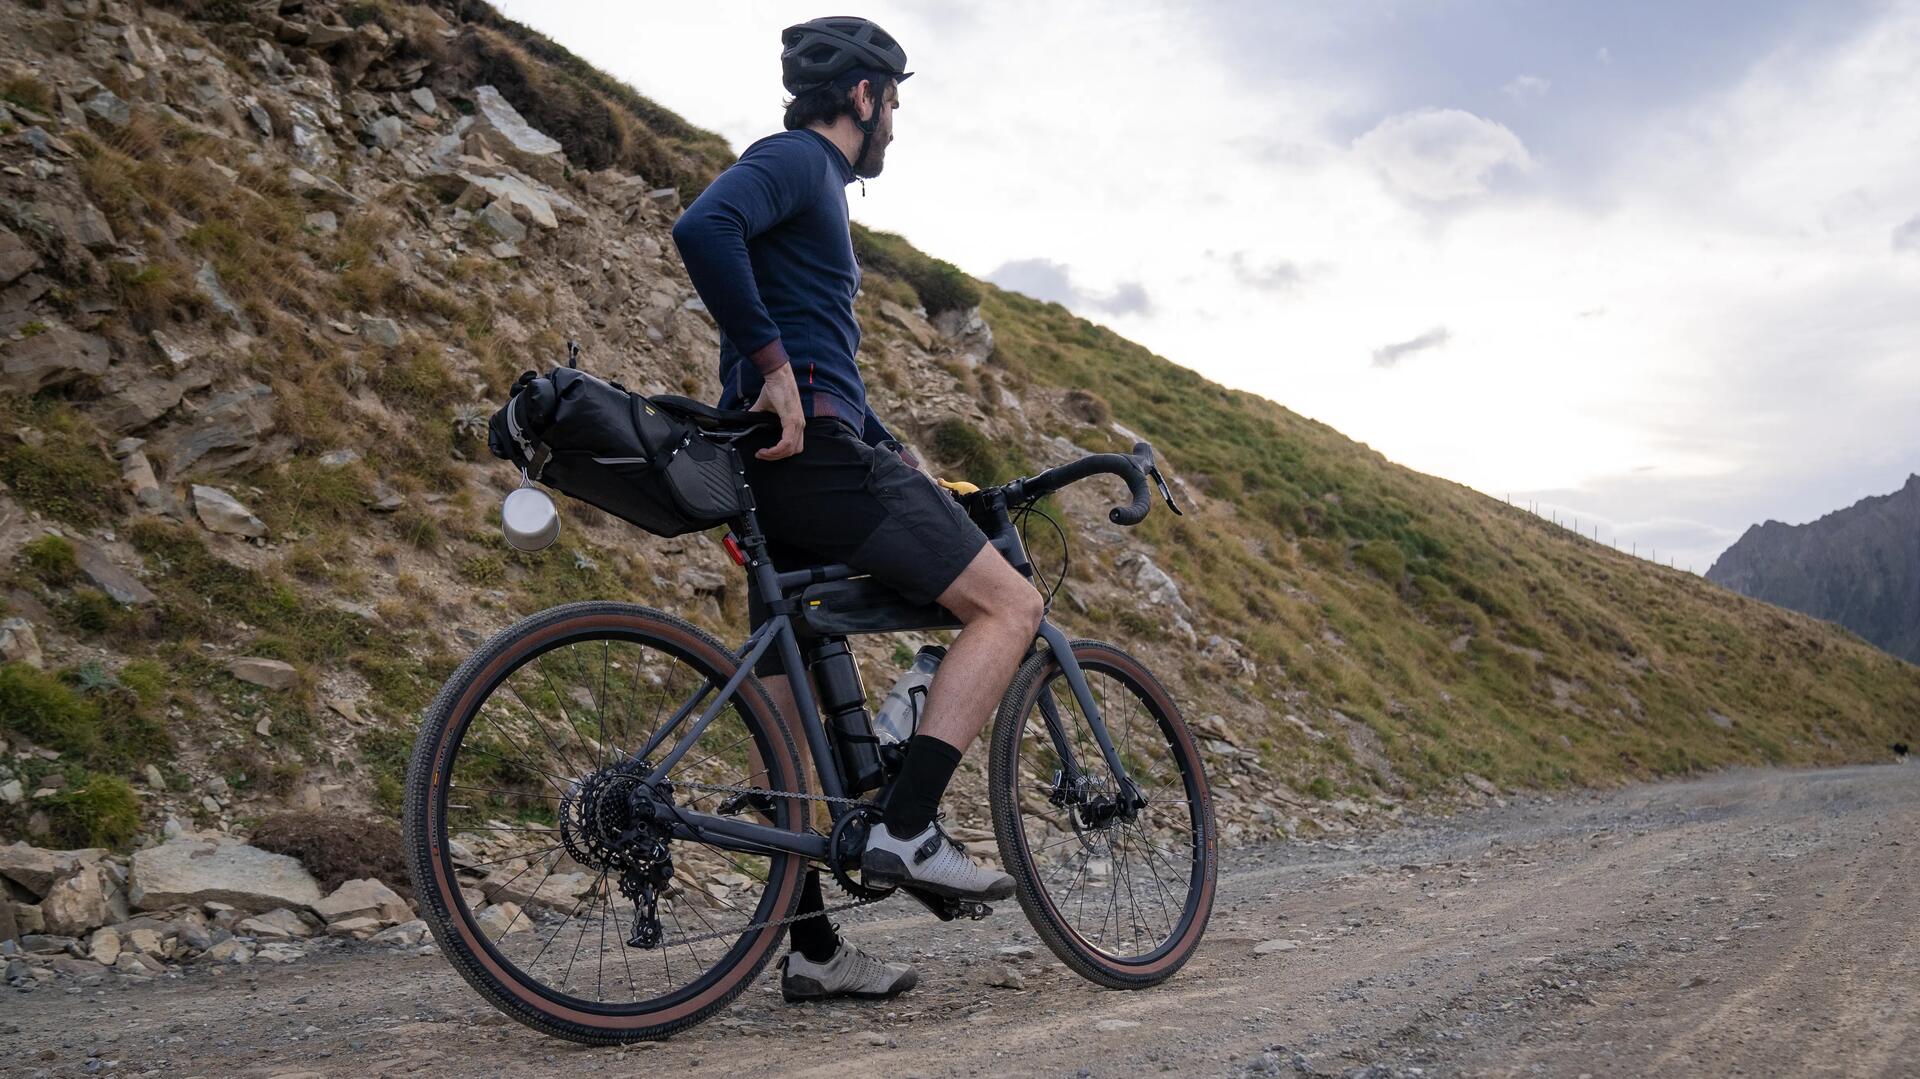 How to equip your gravel bike for bikepacking